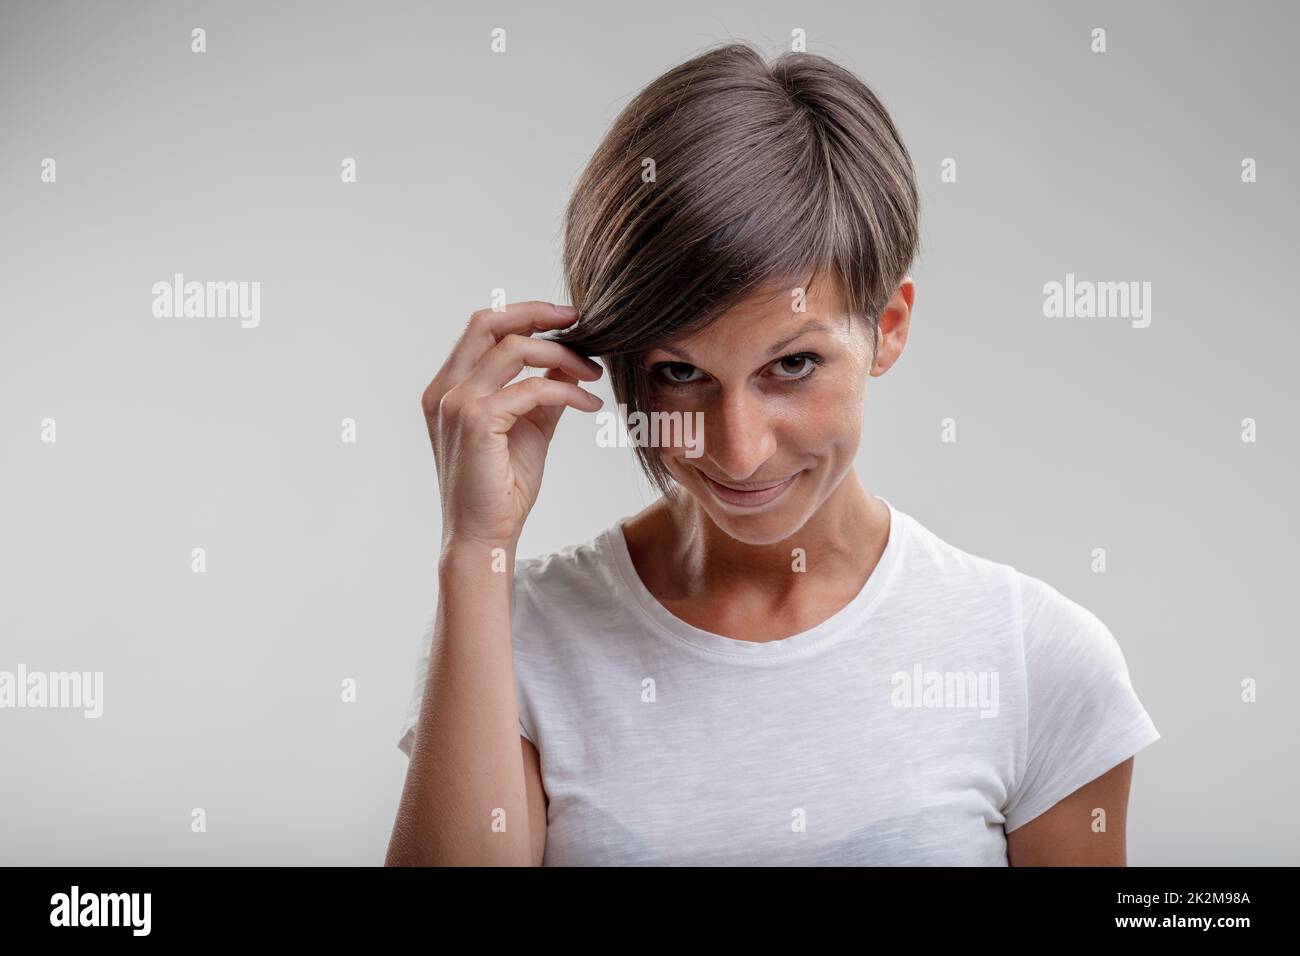 Mature woman holding aside her hair Stock Photo